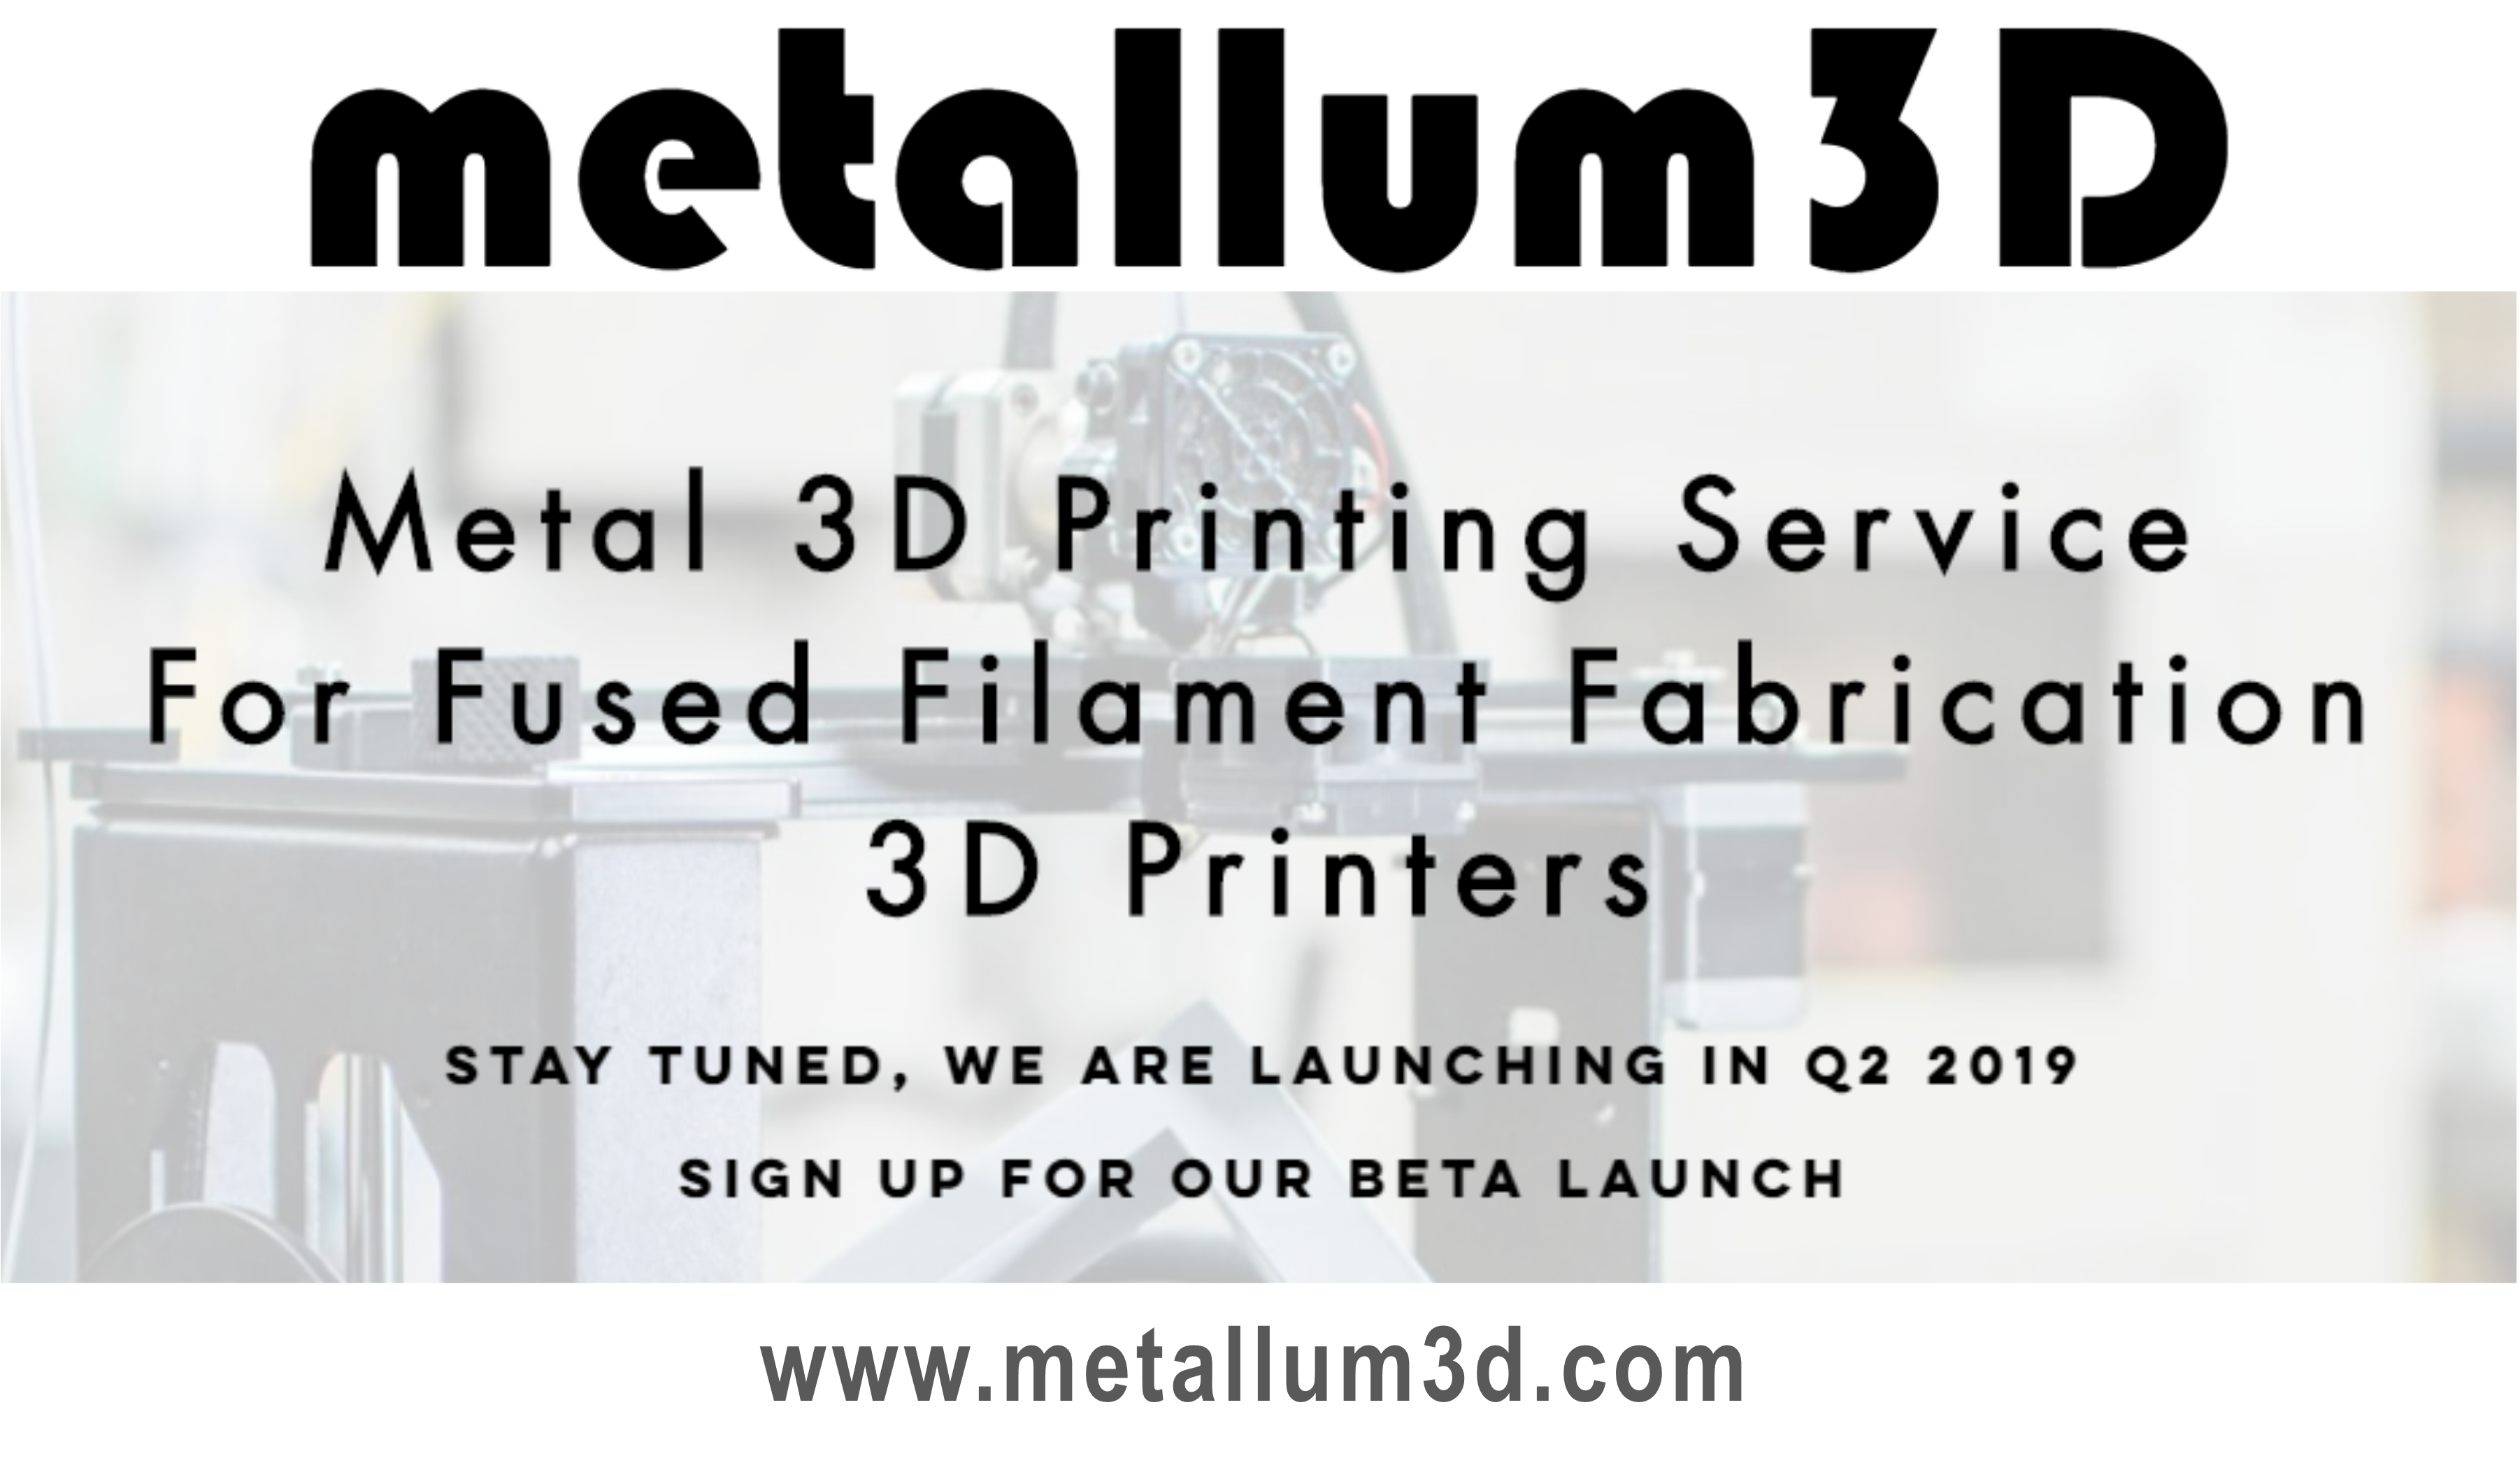 CIT GAP Funds has invested in Charlottesville, Va. company Metallum3D. The company offers affordable and accessible metal 3D printing through combined low cost, high performance, Fused Filament Fabrication 3D printers with our patent pending metal 3D printing filaments and Microwave Densification process to create an affordable and accessible metal 3D printing service that delivers exceptional value.